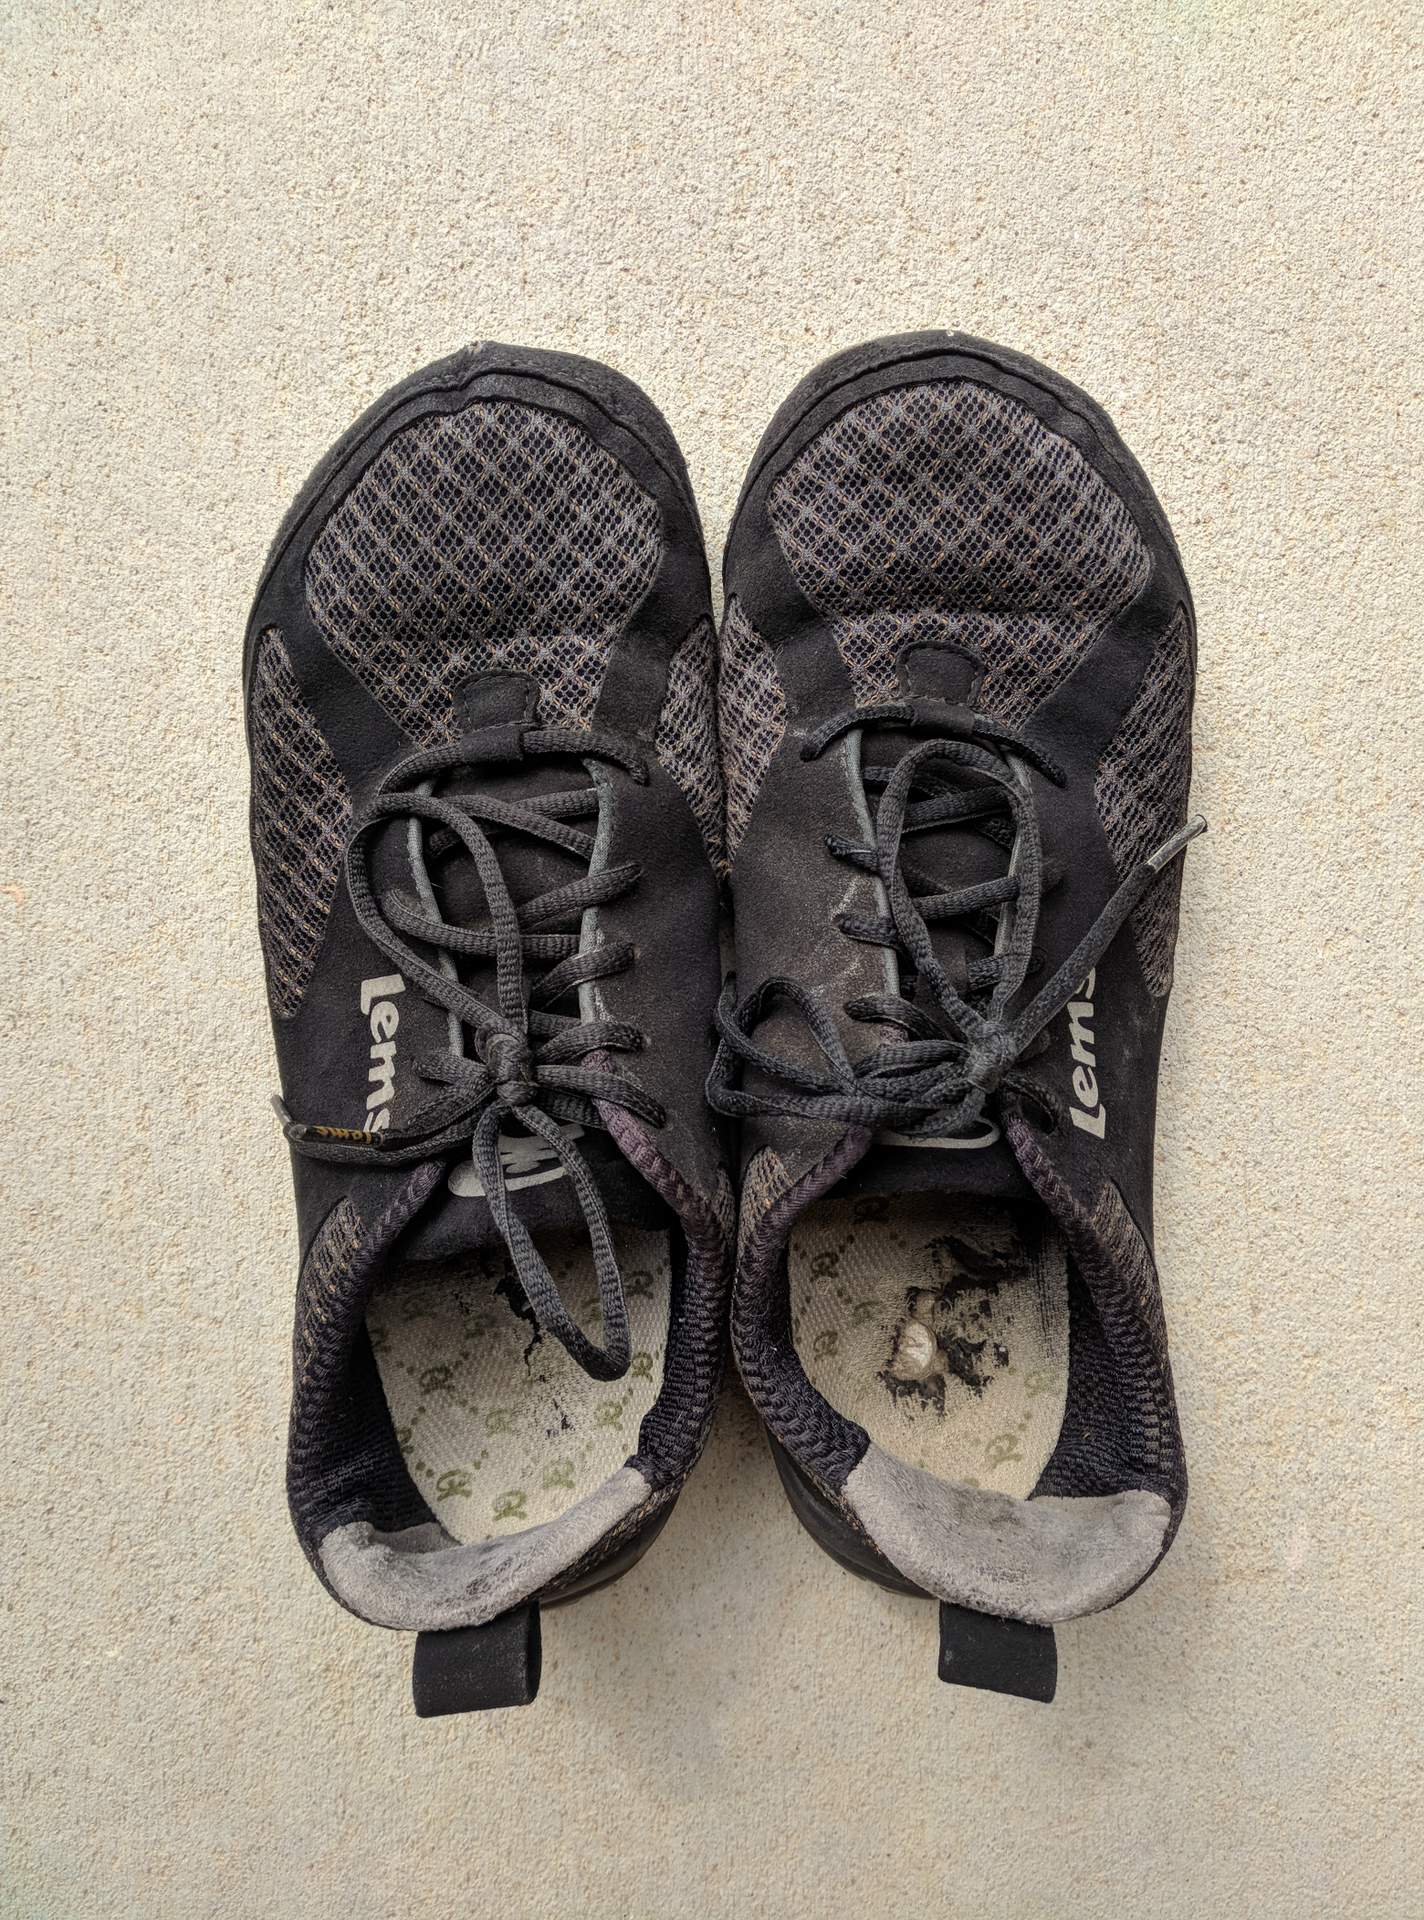 Lems Primal 2 Shoes: How Long Do They Last?